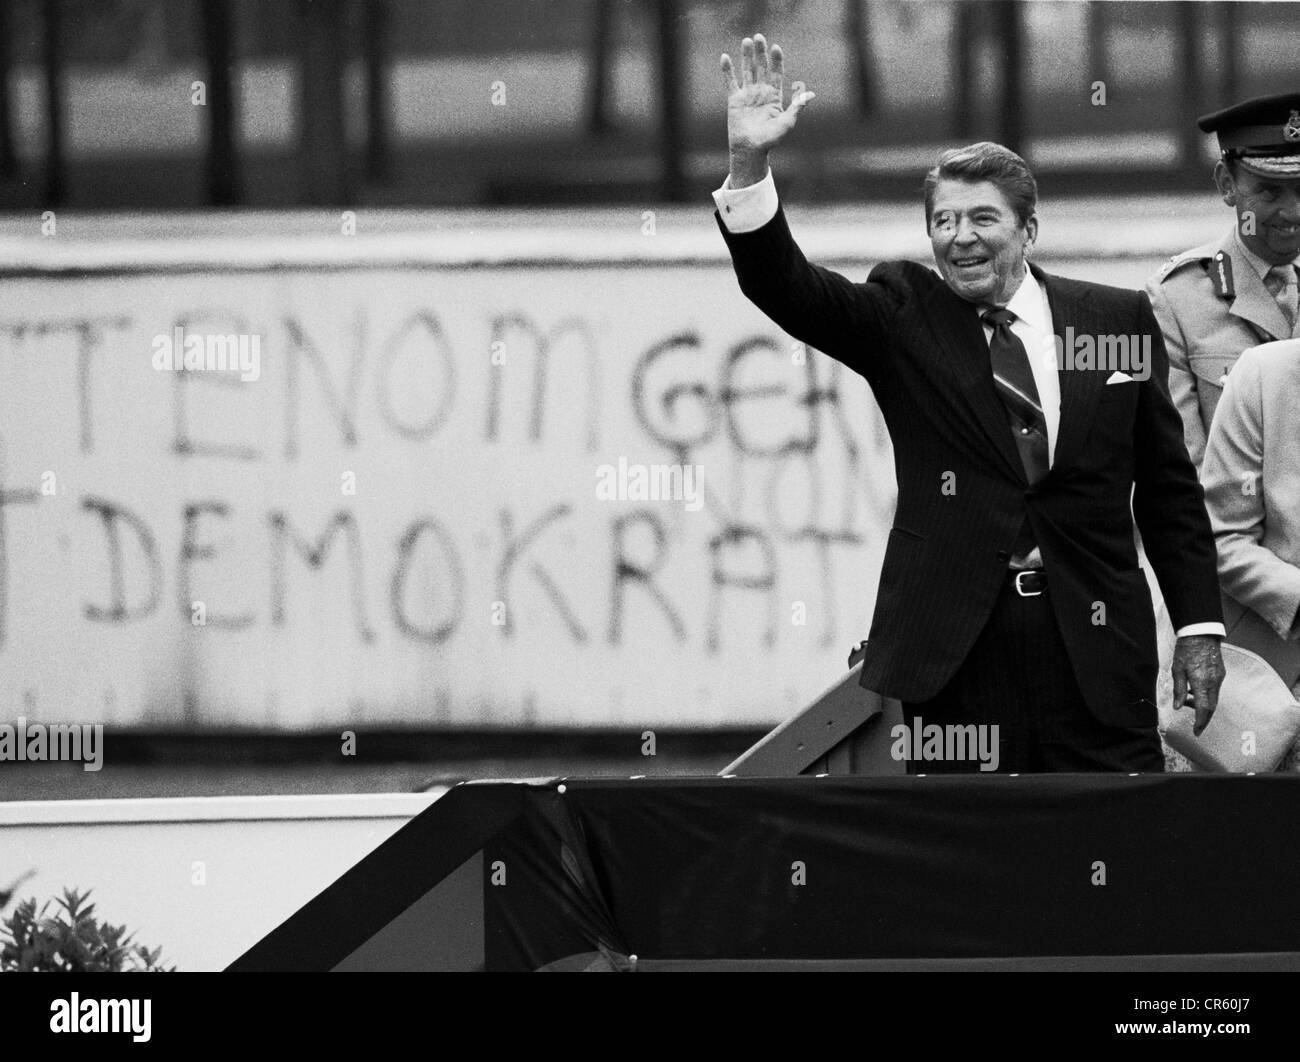 Reagan, Ronald, 6.2.1911 - 5.6.2004, American actor and politician (Republican), President of the United States, half length, standing at Brandenburg Gate, Berlin, Germany, 12.6.1987, Stock Photo